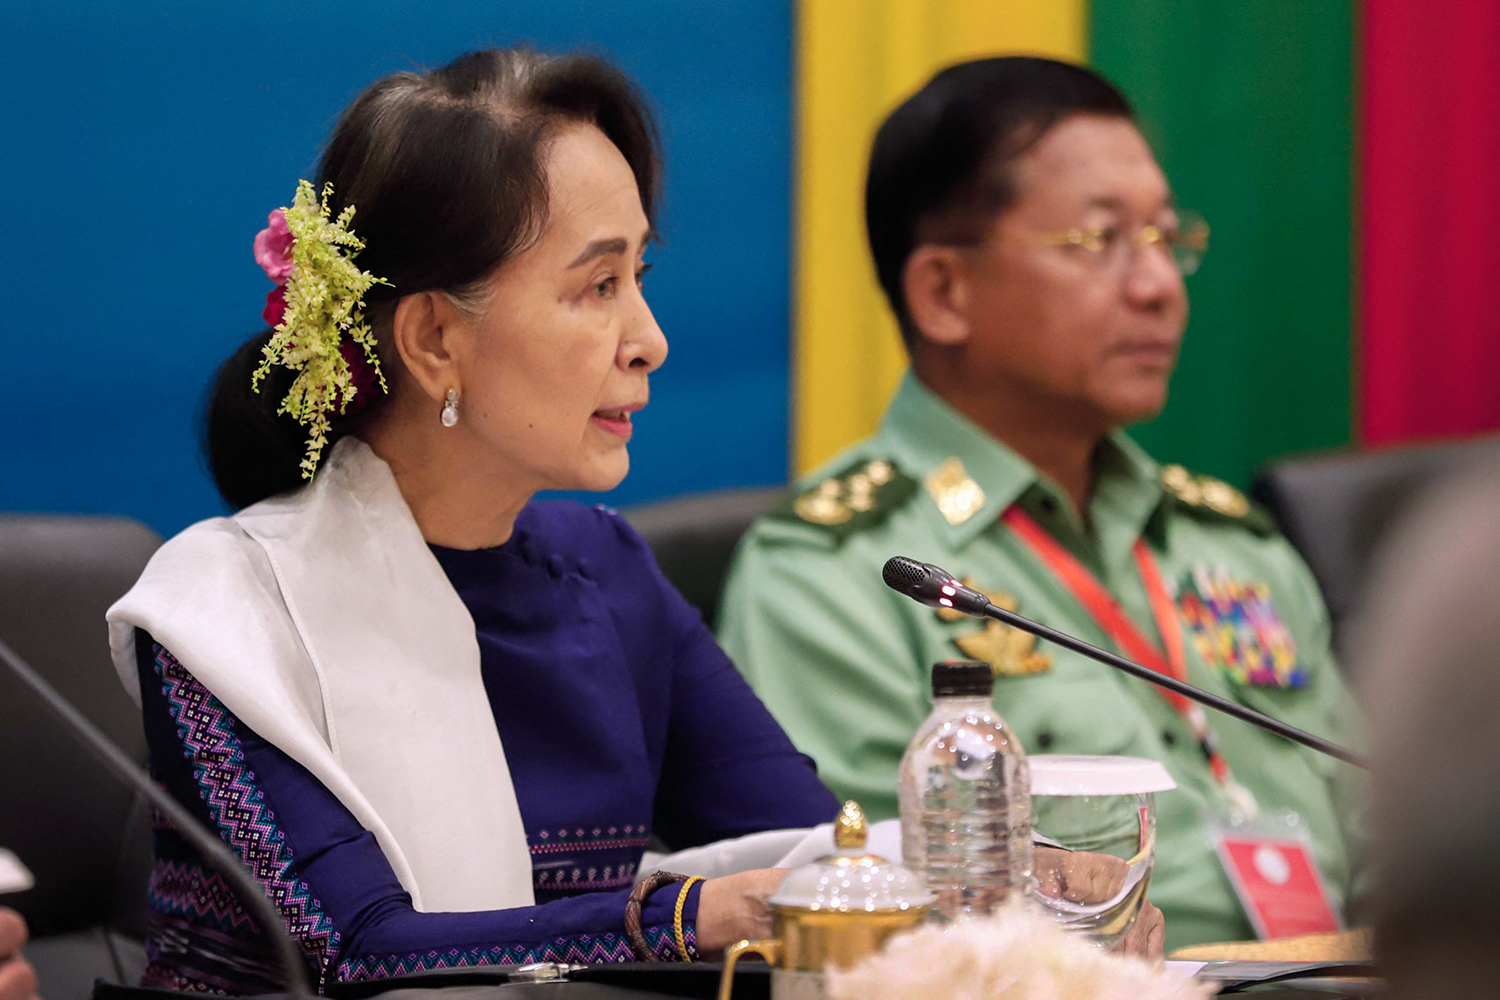 Aung San Suu Kyi presides over a meeting in Nay Pyi Taw with Senior General Min Aung Hlaing on the third anniversary of the signing of Myanmar's Nationwide Ceasefire Agreement on October 15, 2018. (AFP)